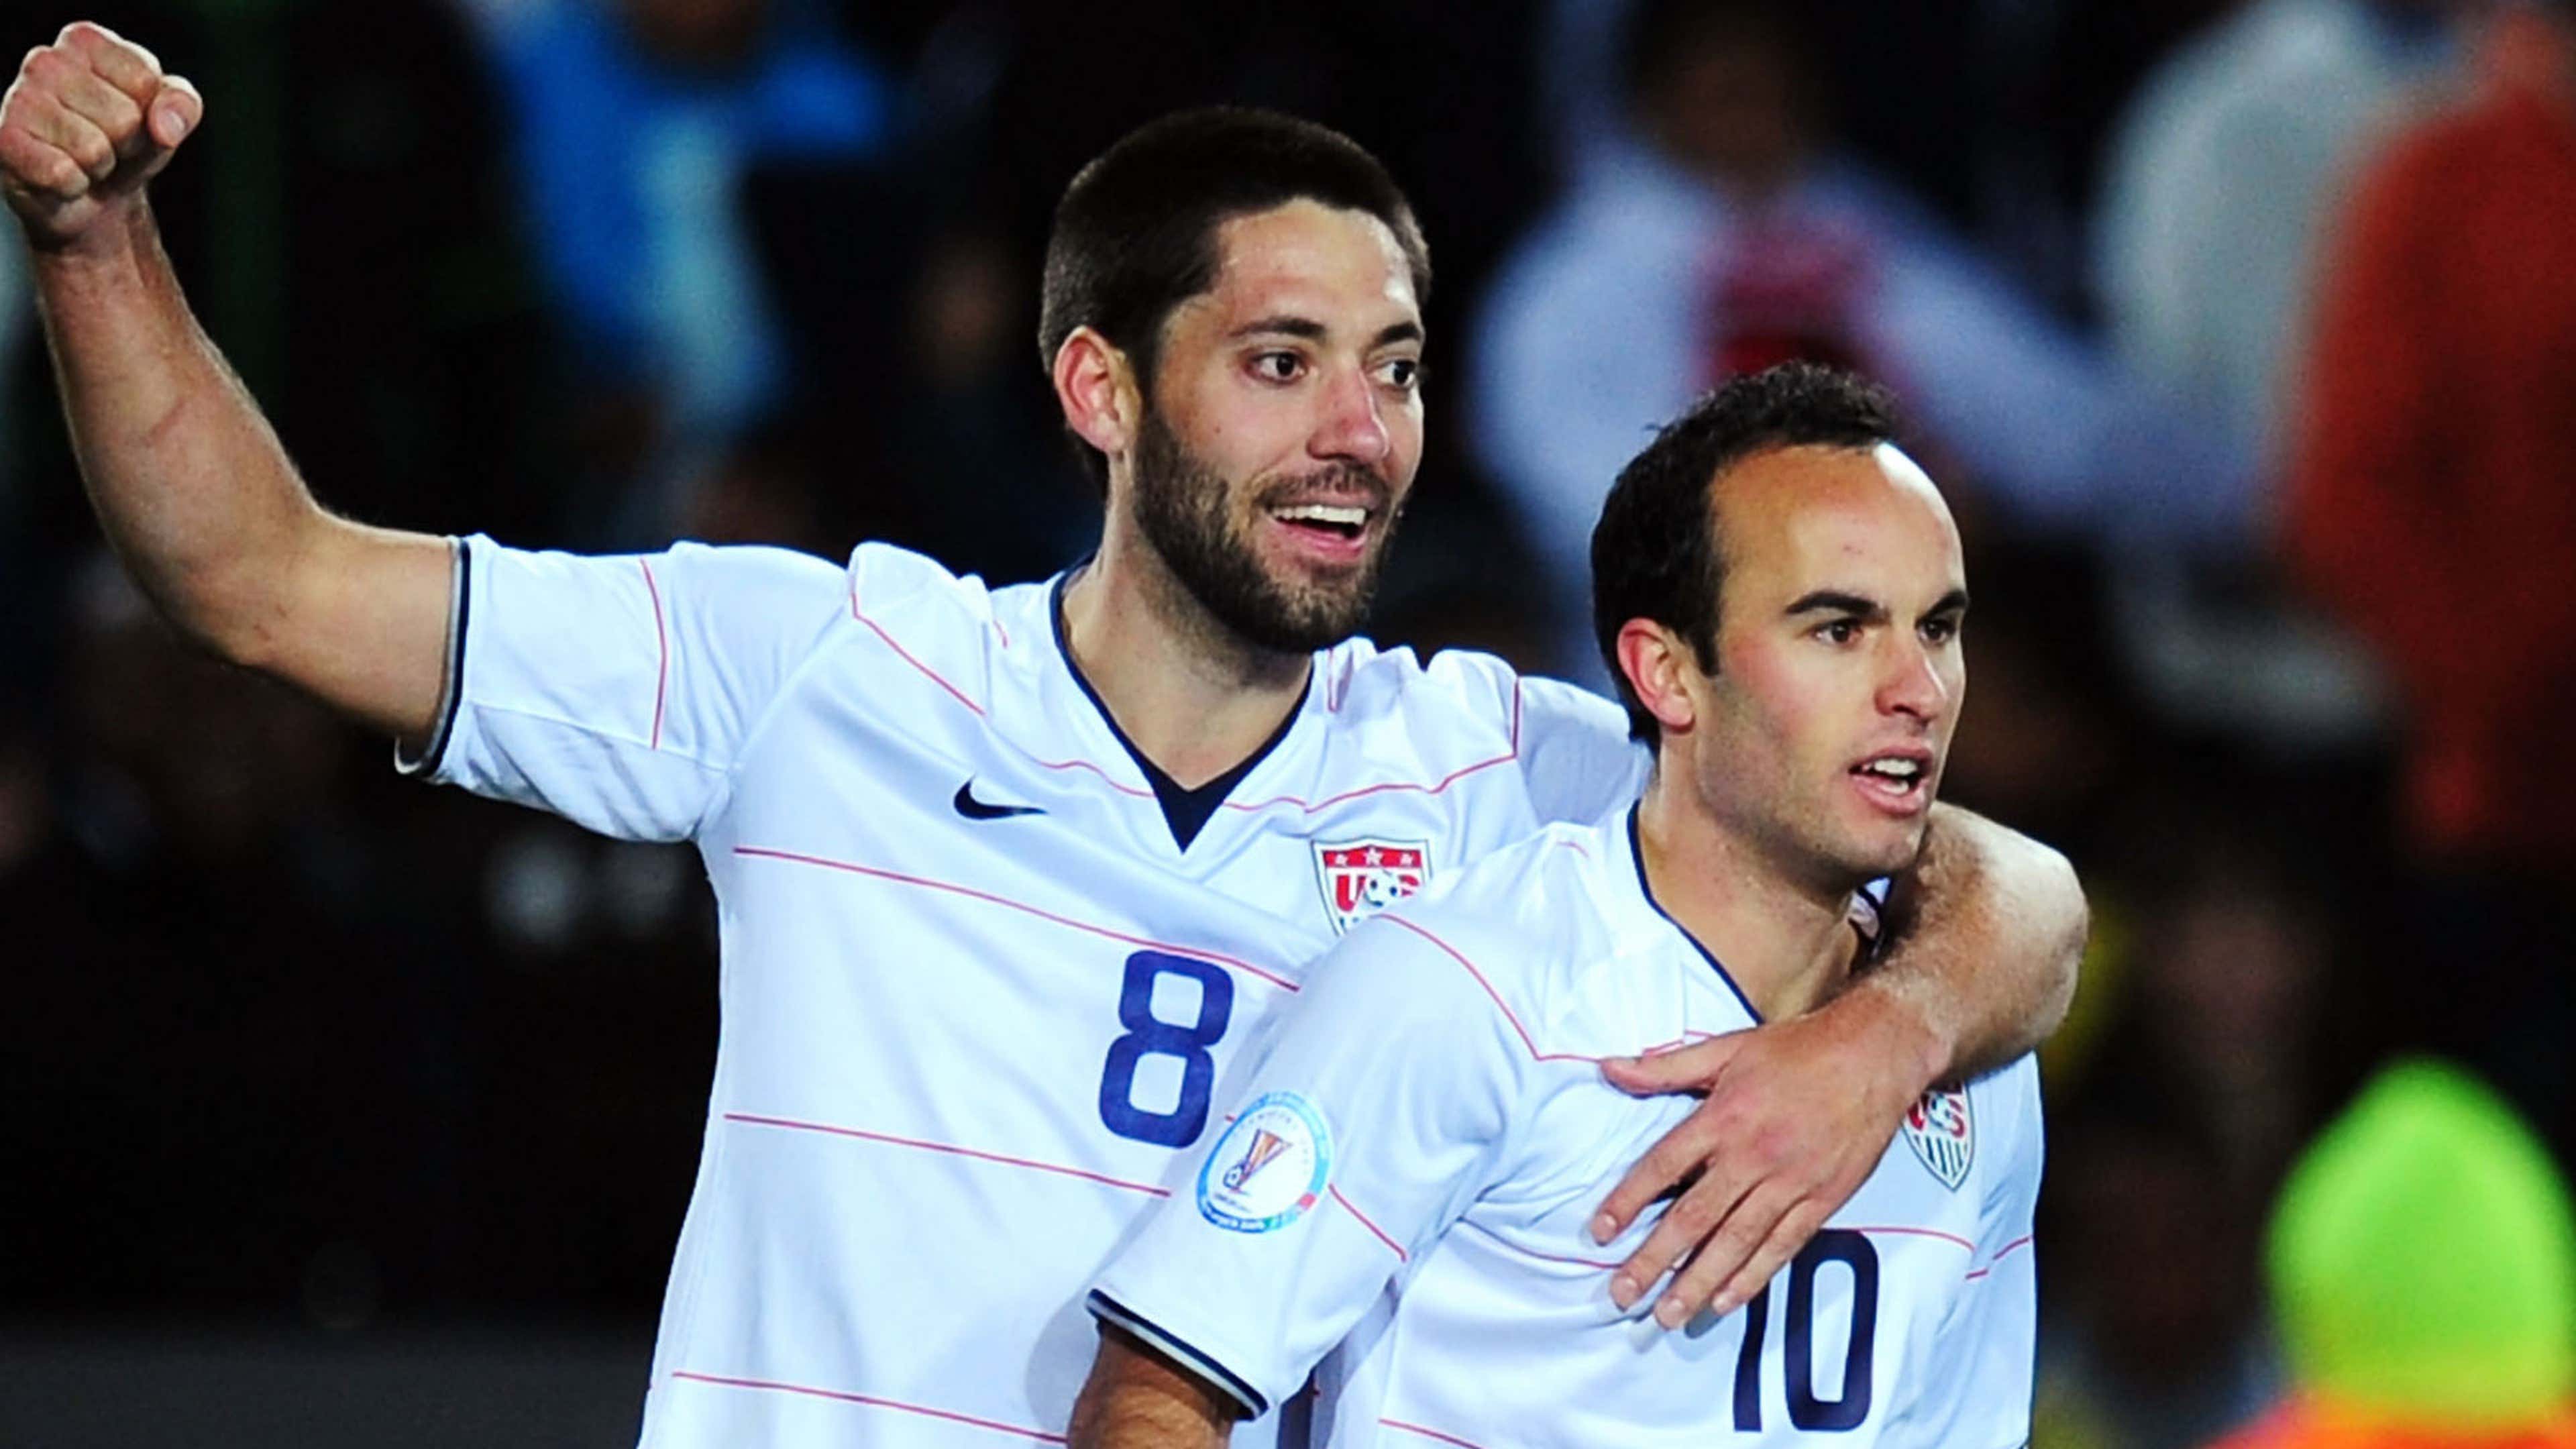 Who is USA's all-time leading goal scorer? Dempsey, Donovan